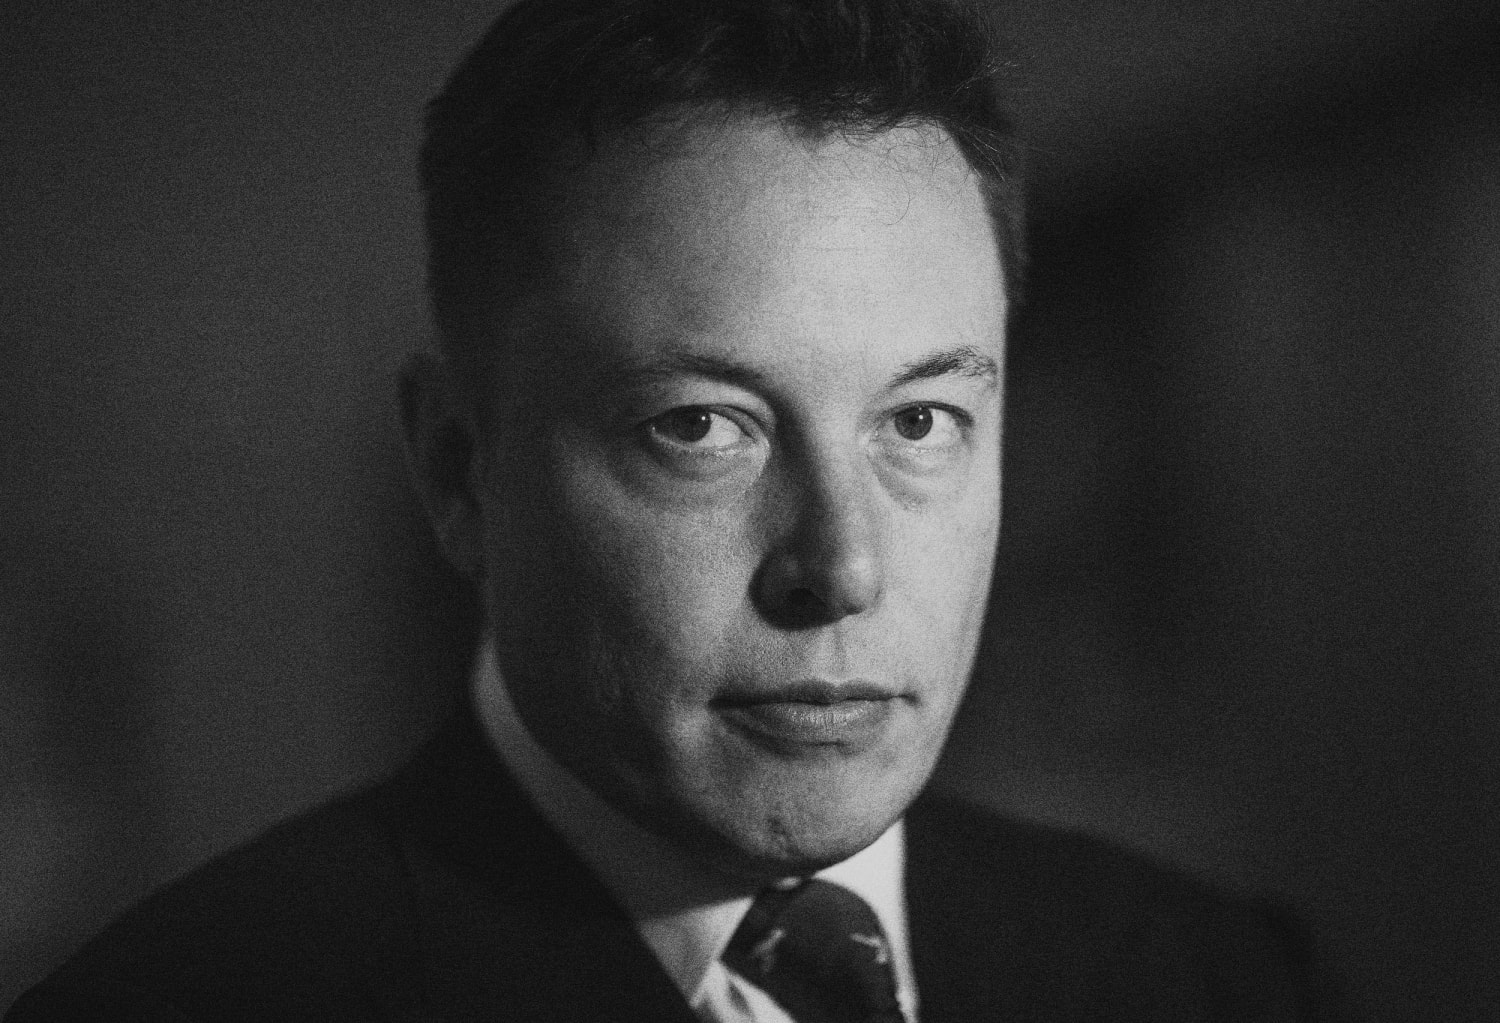 Elon Musk's uneasy relationship with the left explodes over Twitter takeover